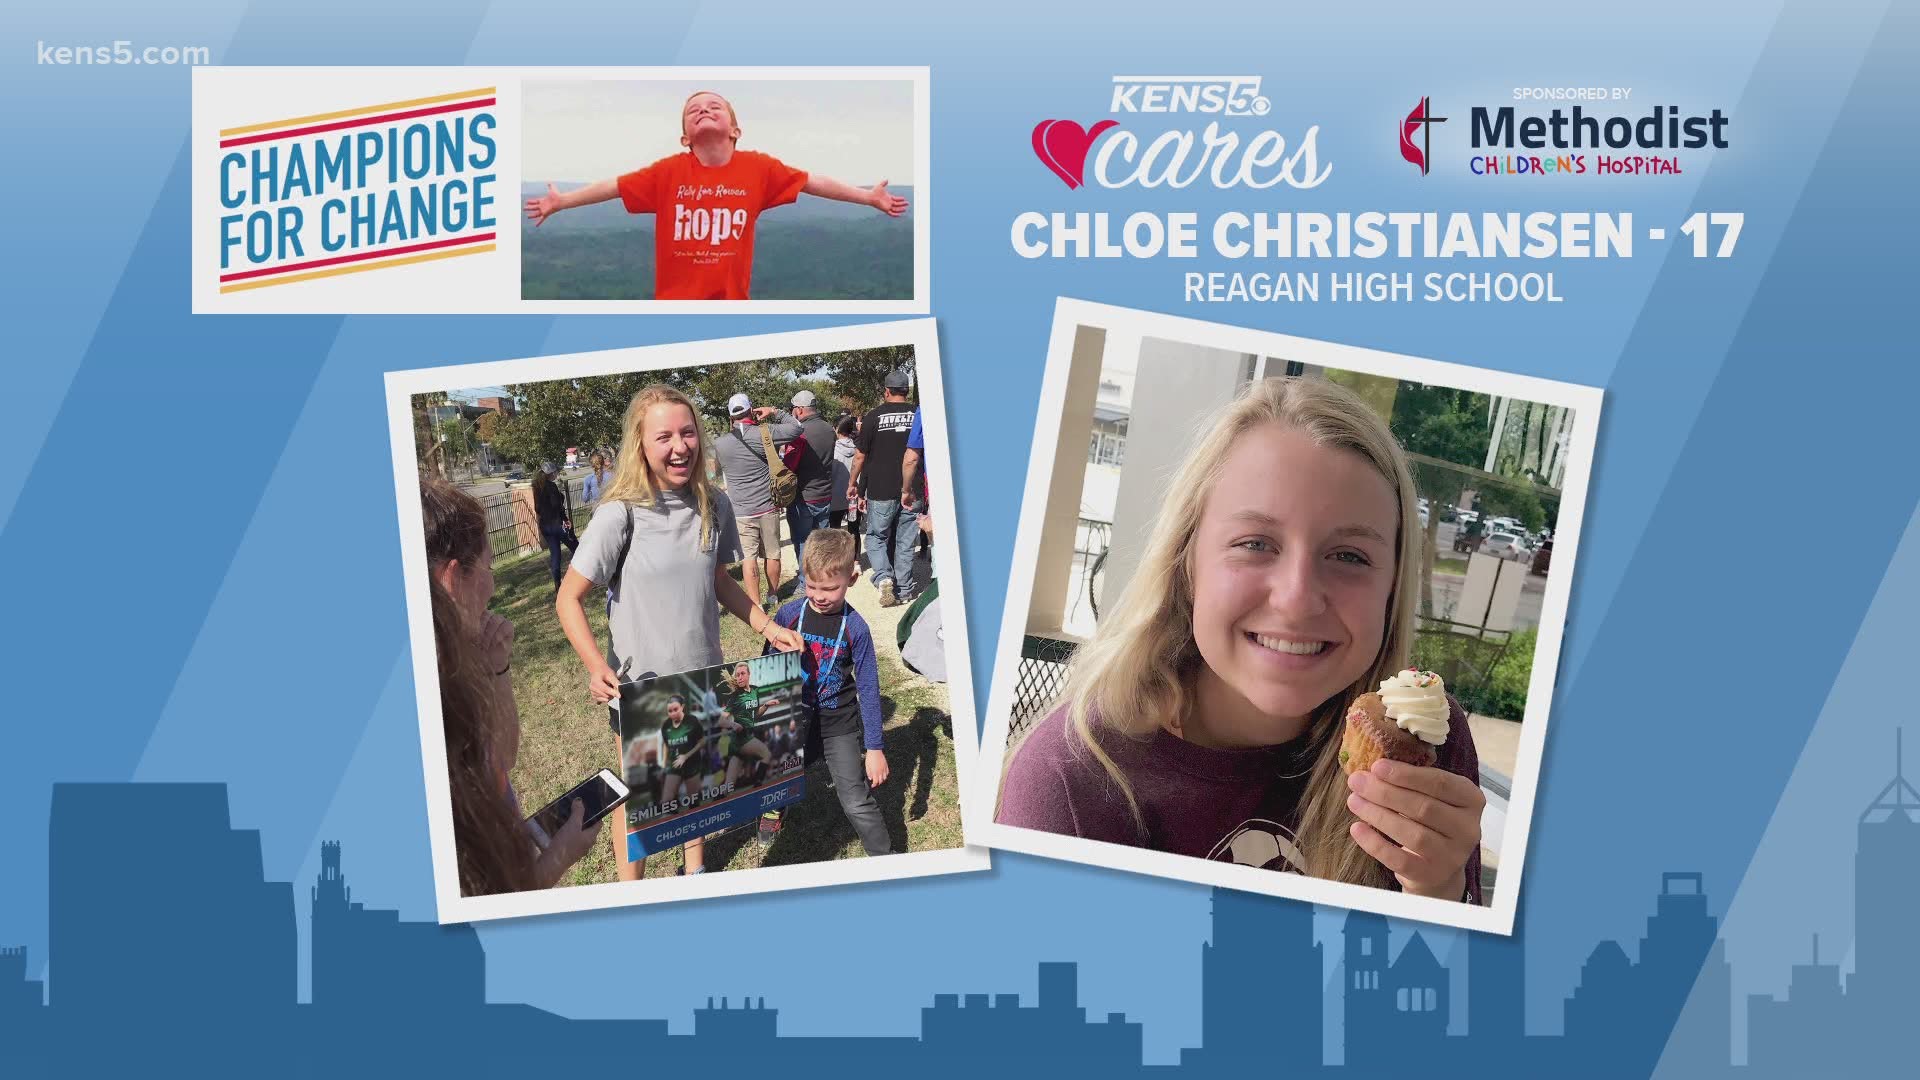 One of our Champions for Change, Chloe Christiansen, has Type 1 diabetes and she uses her condition to help lift others up.